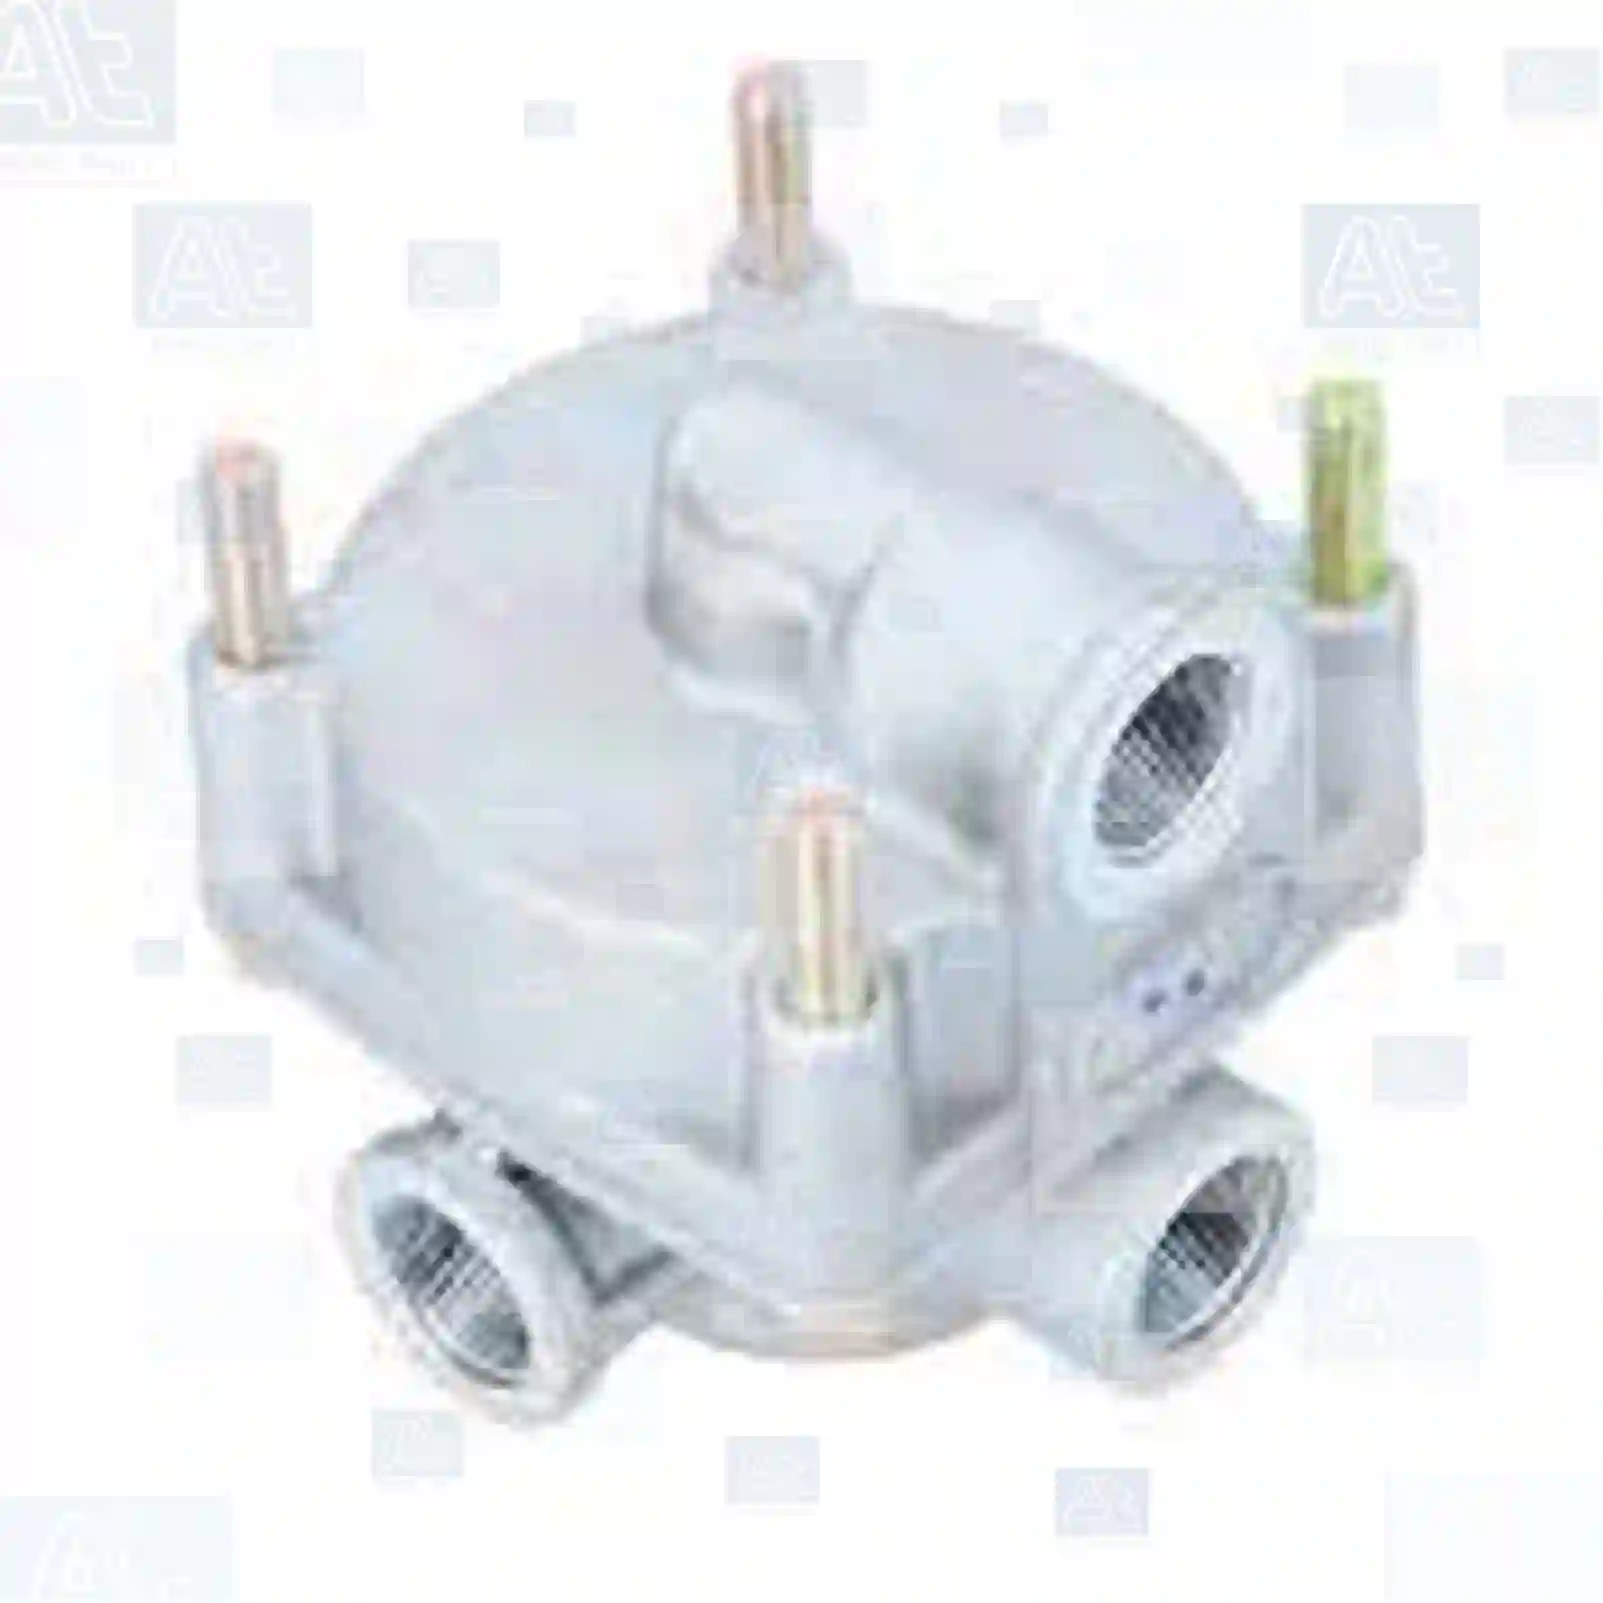 Relay valve, at no 77713711, oem no: 605310600, 0522545, 0522545R, 1505145, 522545, 522545A, 522545R, 02077426, 01278511, 02444906, 04625756, 42015698, 5000012541, 71005249, A2131600, CF3516517, 201248, 01278511, 02444906, 04625756, 1278511, 2444906, 42015698, 42020573, 4625756, 5000012541, 61578004, 71005249, 77390, 500945379, 945379, 5029280, 502928001, 502928014, 81436096008, 81991643679, 90810114360, 90810114390, 0004296544, 0014293044, 0034295244, 110242100, AIF0008, 5000012541, 5001829194, 5021170451, 1935623, 8283421000, 82834210000, 348909, 384909 At Spare Part | Engine, Accelerator Pedal, Camshaft, Connecting Rod, Crankcase, Crankshaft, Cylinder Head, Engine Suspension Mountings, Exhaust Manifold, Exhaust Gas Recirculation, Filter Kits, Flywheel Housing, General Overhaul Kits, Engine, Intake Manifold, Oil Cleaner, Oil Cooler, Oil Filter, Oil Pump, Oil Sump, Piston & Liner, Sensor & Switch, Timing Case, Turbocharger, Cooling System, Belt Tensioner, Coolant Filter, Coolant Pipe, Corrosion Prevention Agent, Drive, Expansion Tank, Fan, Intercooler, Monitors & Gauges, Radiator, Thermostat, V-Belt / Timing belt, Water Pump, Fuel System, Electronical Injector Unit, Feed Pump, Fuel Filter, cpl., Fuel Gauge Sender,  Fuel Line, Fuel Pump, Fuel Tank, Injection Line Kit, Injection Pump, Exhaust System, Clutch & Pedal, Gearbox, Propeller Shaft, Axles, Brake System, Hubs & Wheels, Suspension, Leaf Spring, Universal Parts / Accessories, Steering, Electrical System, Cabin Relay valve, at no 77713711, oem no: 605310600, 0522545, 0522545R, 1505145, 522545, 522545A, 522545R, 02077426, 01278511, 02444906, 04625756, 42015698, 5000012541, 71005249, A2131600, CF3516517, 201248, 01278511, 02444906, 04625756, 1278511, 2444906, 42015698, 42020573, 4625756, 5000012541, 61578004, 71005249, 77390, 500945379, 945379, 5029280, 502928001, 502928014, 81436096008, 81991643679, 90810114360, 90810114390, 0004296544, 0014293044, 0034295244, 110242100, AIF0008, 5000012541, 5001829194, 5021170451, 1935623, 8283421000, 82834210000, 348909, 384909 At Spare Part | Engine, Accelerator Pedal, Camshaft, Connecting Rod, Crankcase, Crankshaft, Cylinder Head, Engine Suspension Mountings, Exhaust Manifold, Exhaust Gas Recirculation, Filter Kits, Flywheel Housing, General Overhaul Kits, Engine, Intake Manifold, Oil Cleaner, Oil Cooler, Oil Filter, Oil Pump, Oil Sump, Piston & Liner, Sensor & Switch, Timing Case, Turbocharger, Cooling System, Belt Tensioner, Coolant Filter, Coolant Pipe, Corrosion Prevention Agent, Drive, Expansion Tank, Fan, Intercooler, Monitors & Gauges, Radiator, Thermostat, V-Belt / Timing belt, Water Pump, Fuel System, Electronical Injector Unit, Feed Pump, Fuel Filter, cpl., Fuel Gauge Sender,  Fuel Line, Fuel Pump, Fuel Tank, Injection Line Kit, Injection Pump, Exhaust System, Clutch & Pedal, Gearbox, Propeller Shaft, Axles, Brake System, Hubs & Wheels, Suspension, Leaf Spring, Universal Parts / Accessories, Steering, Electrical System, Cabin